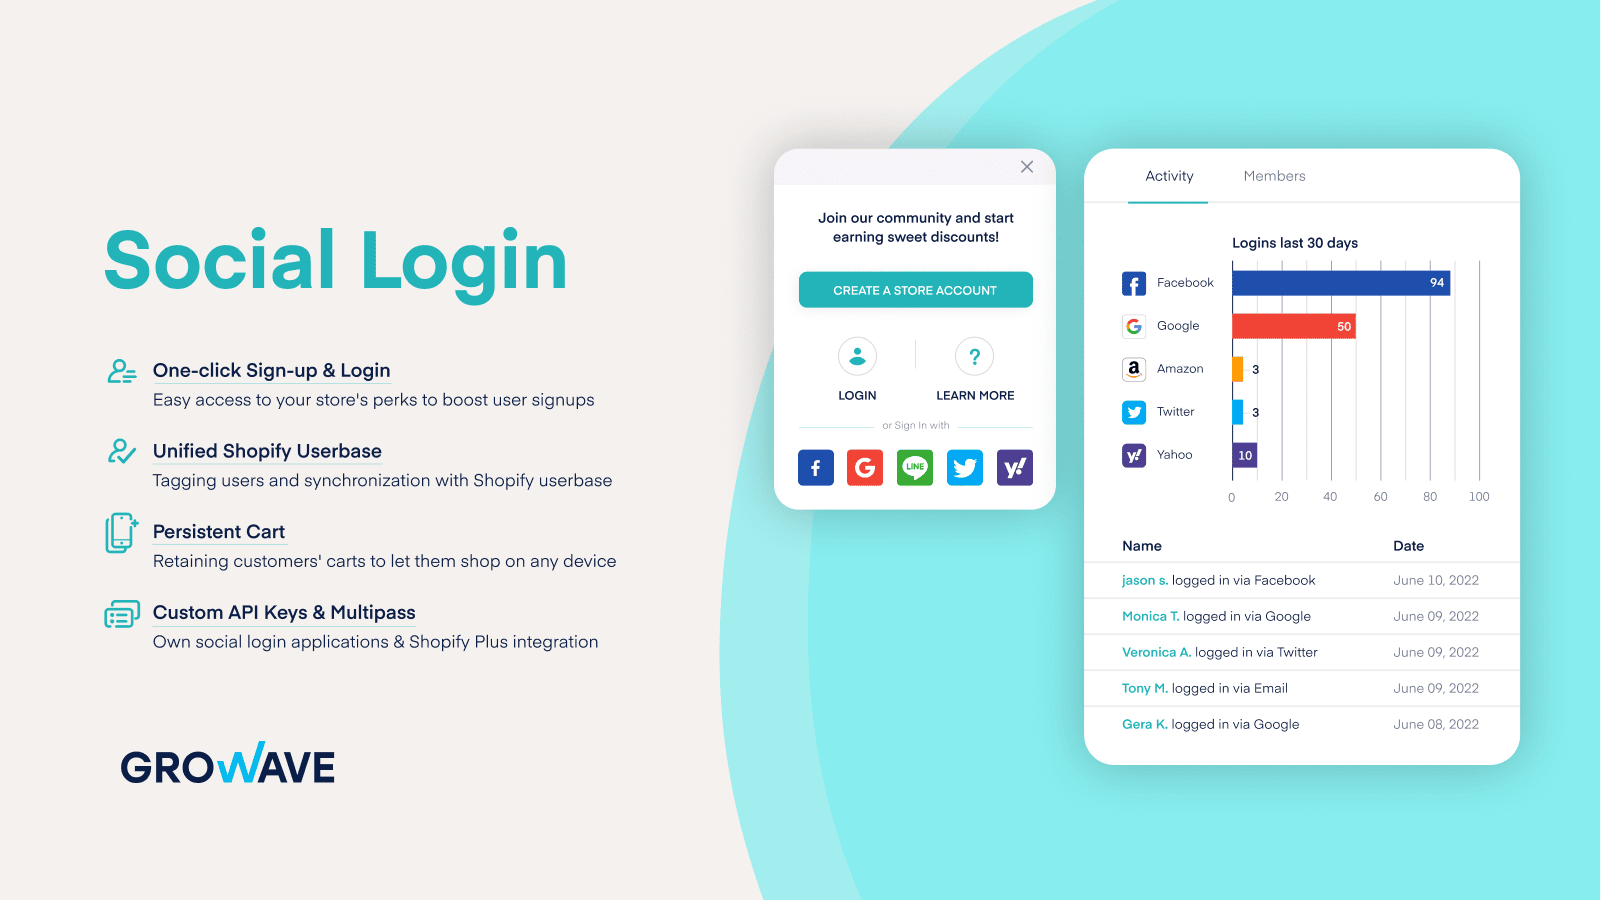 Growave social login app for Shopify and Shopify Plus